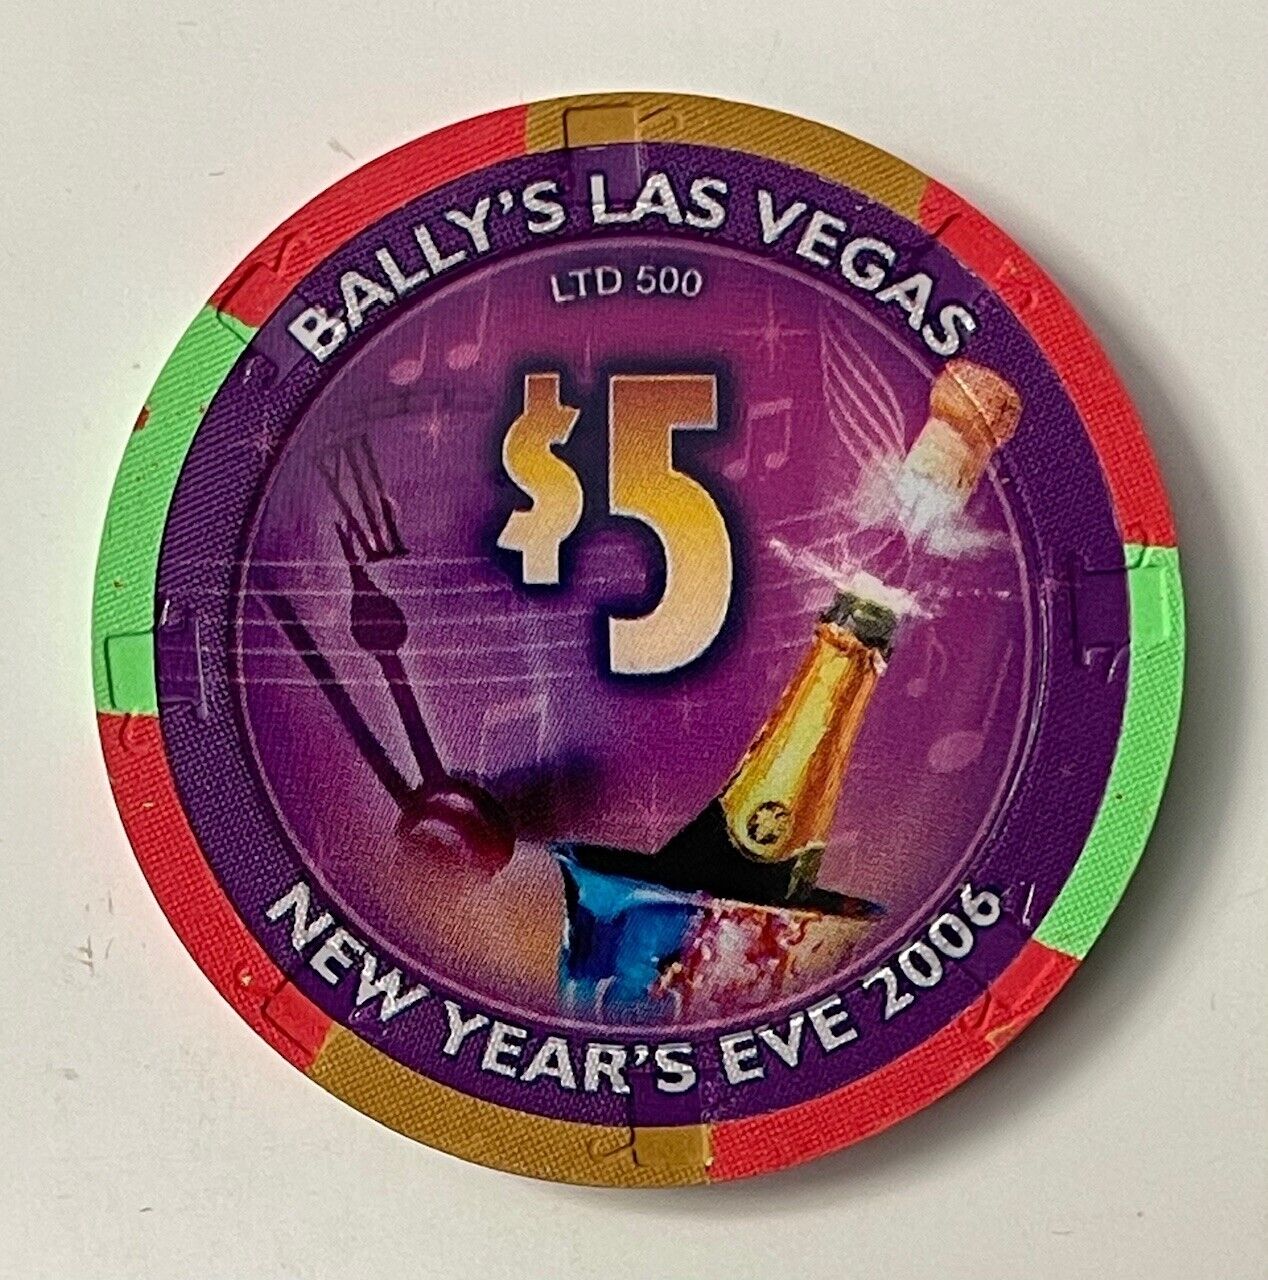 Bally’s $5 Casino Chip Las Vegas New Years Eve 2006 Limited